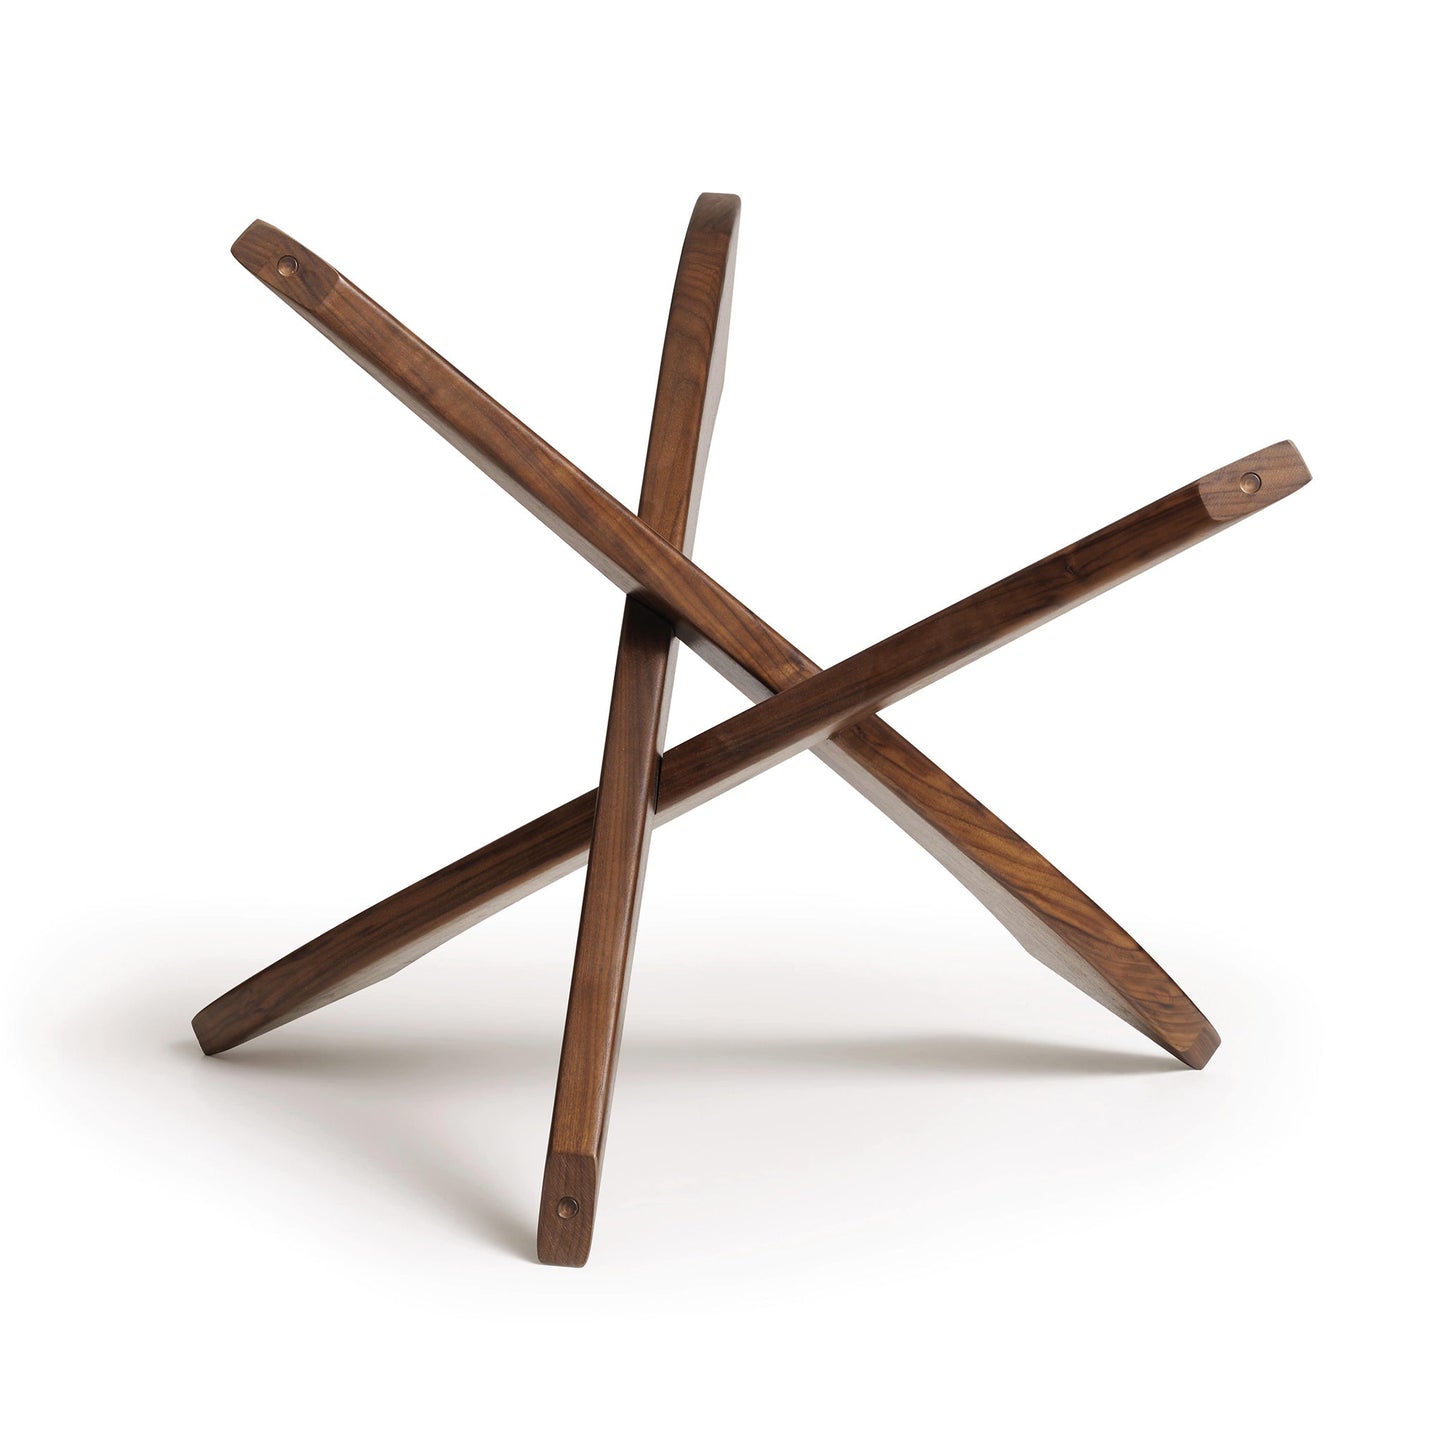 A pair of wooden cross sticks on a white background.